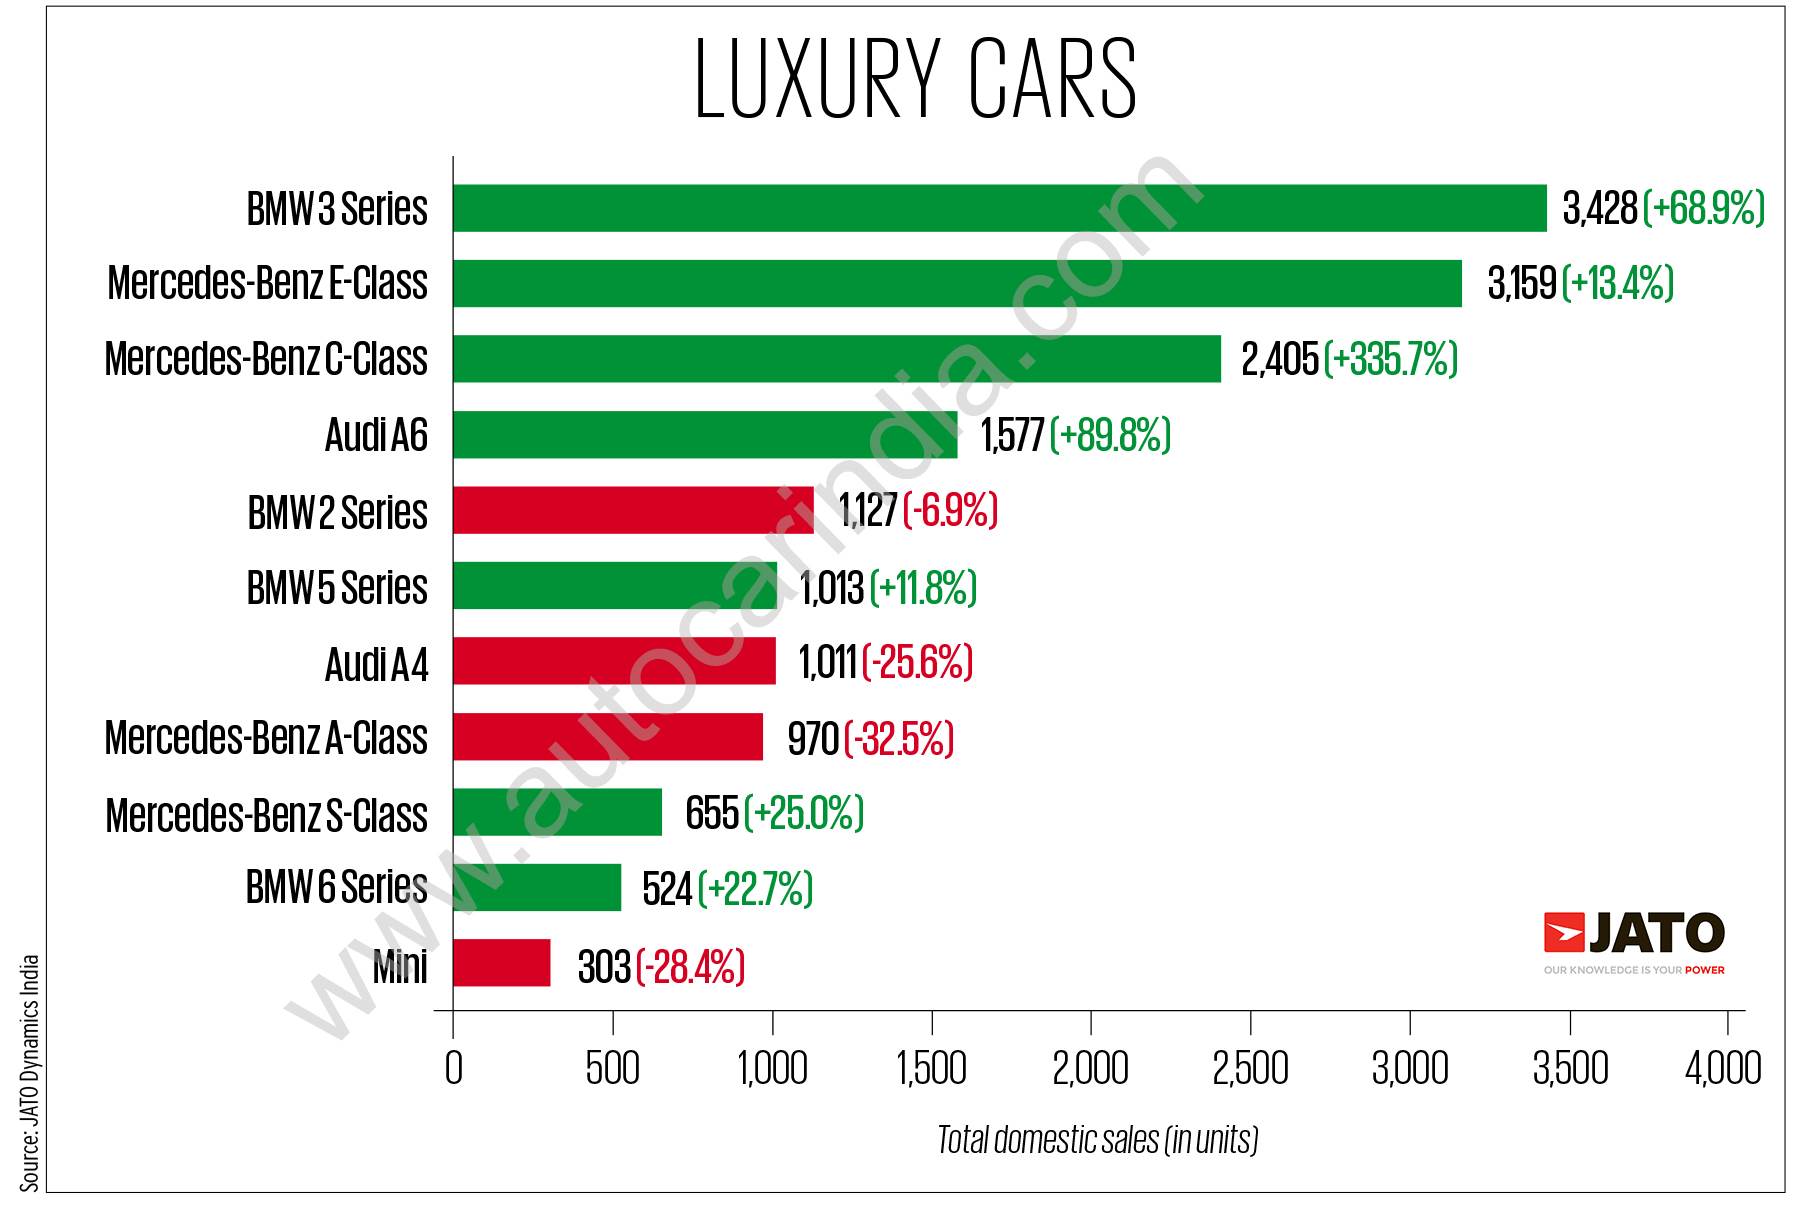 Luxury car sales projected for FY2023 Mercedes Benz, BMW, Audi, and